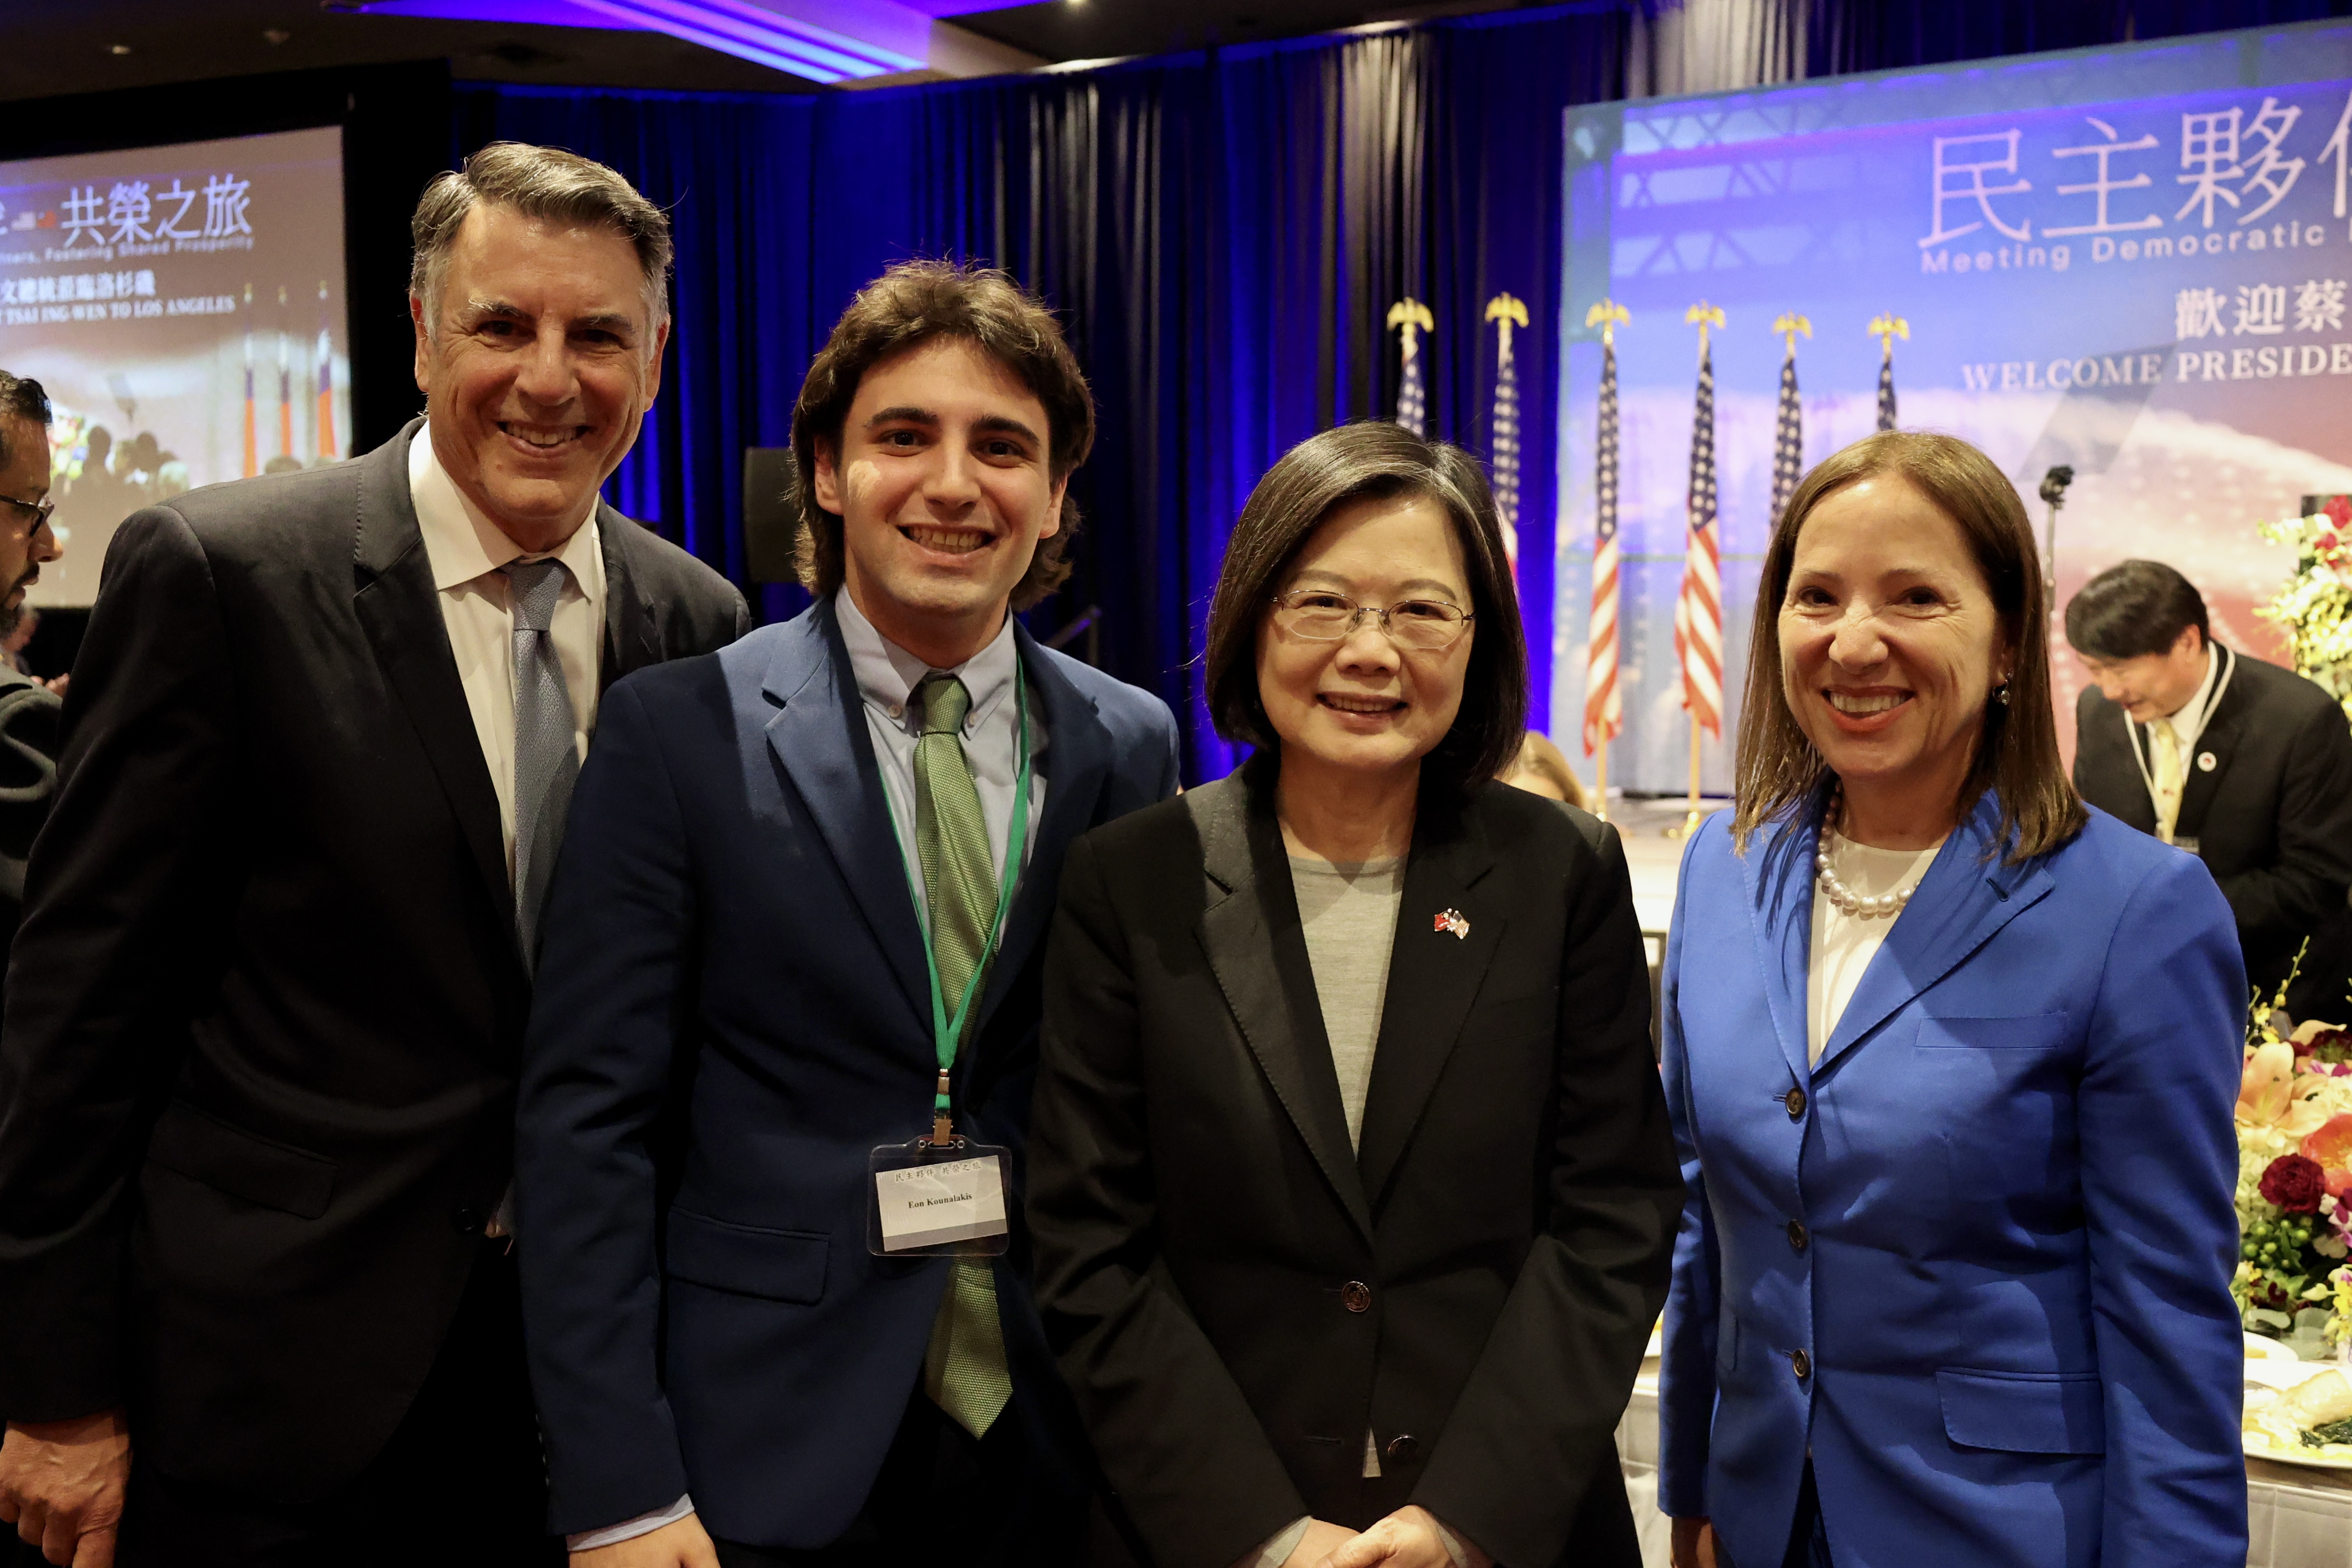 Image of Lt. Governor with President Tsai Ing-wen of Taiwan, Markos and son